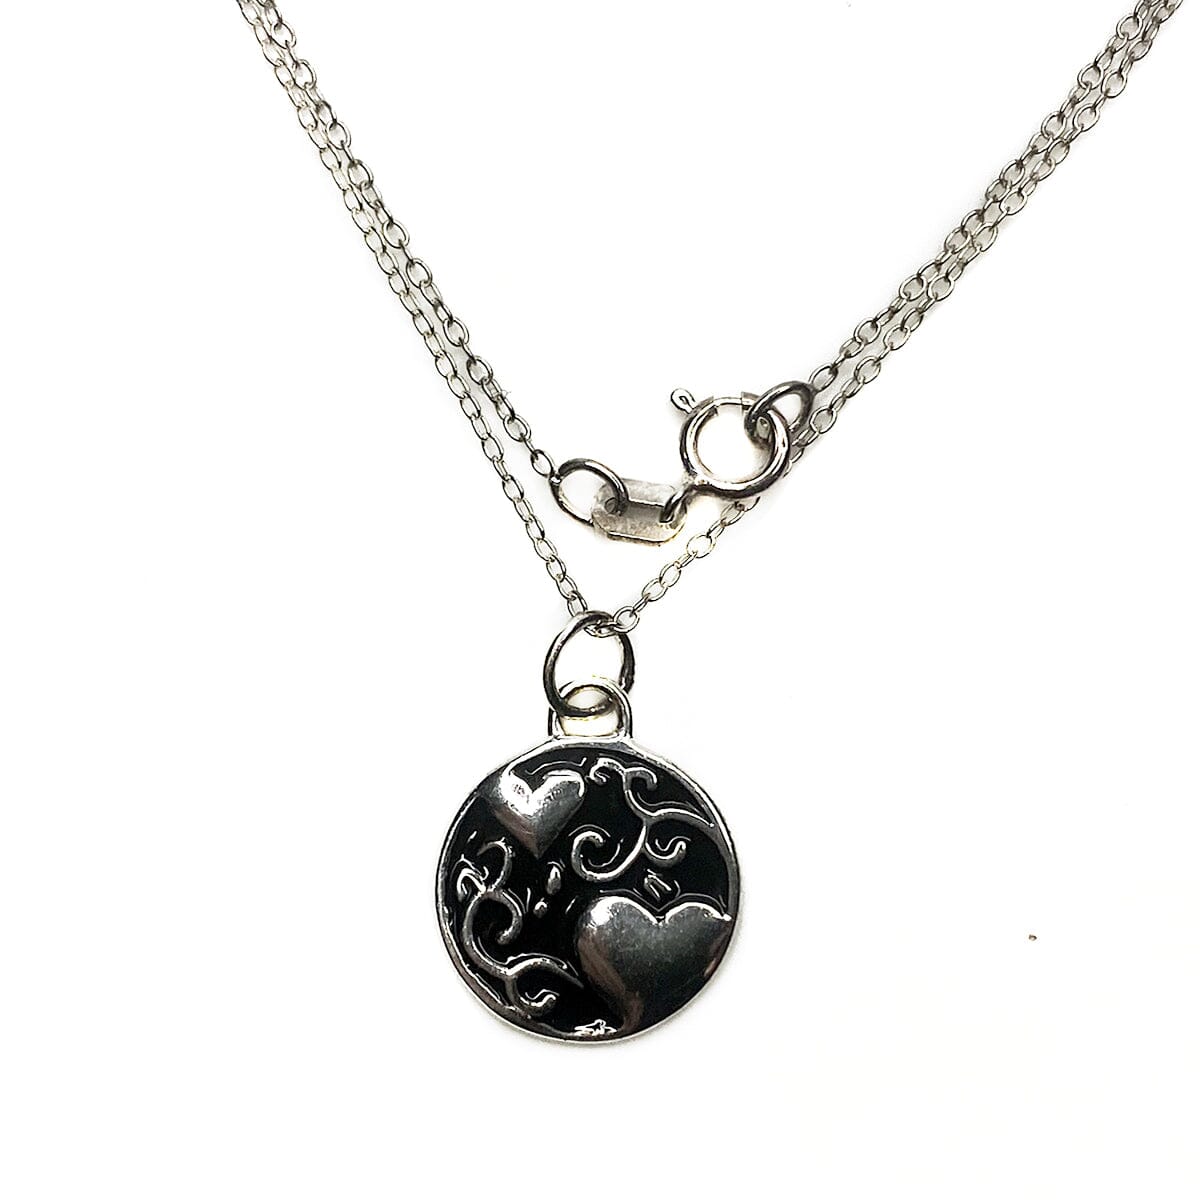 Great Lakes Boutique Silver Friendship Necklace